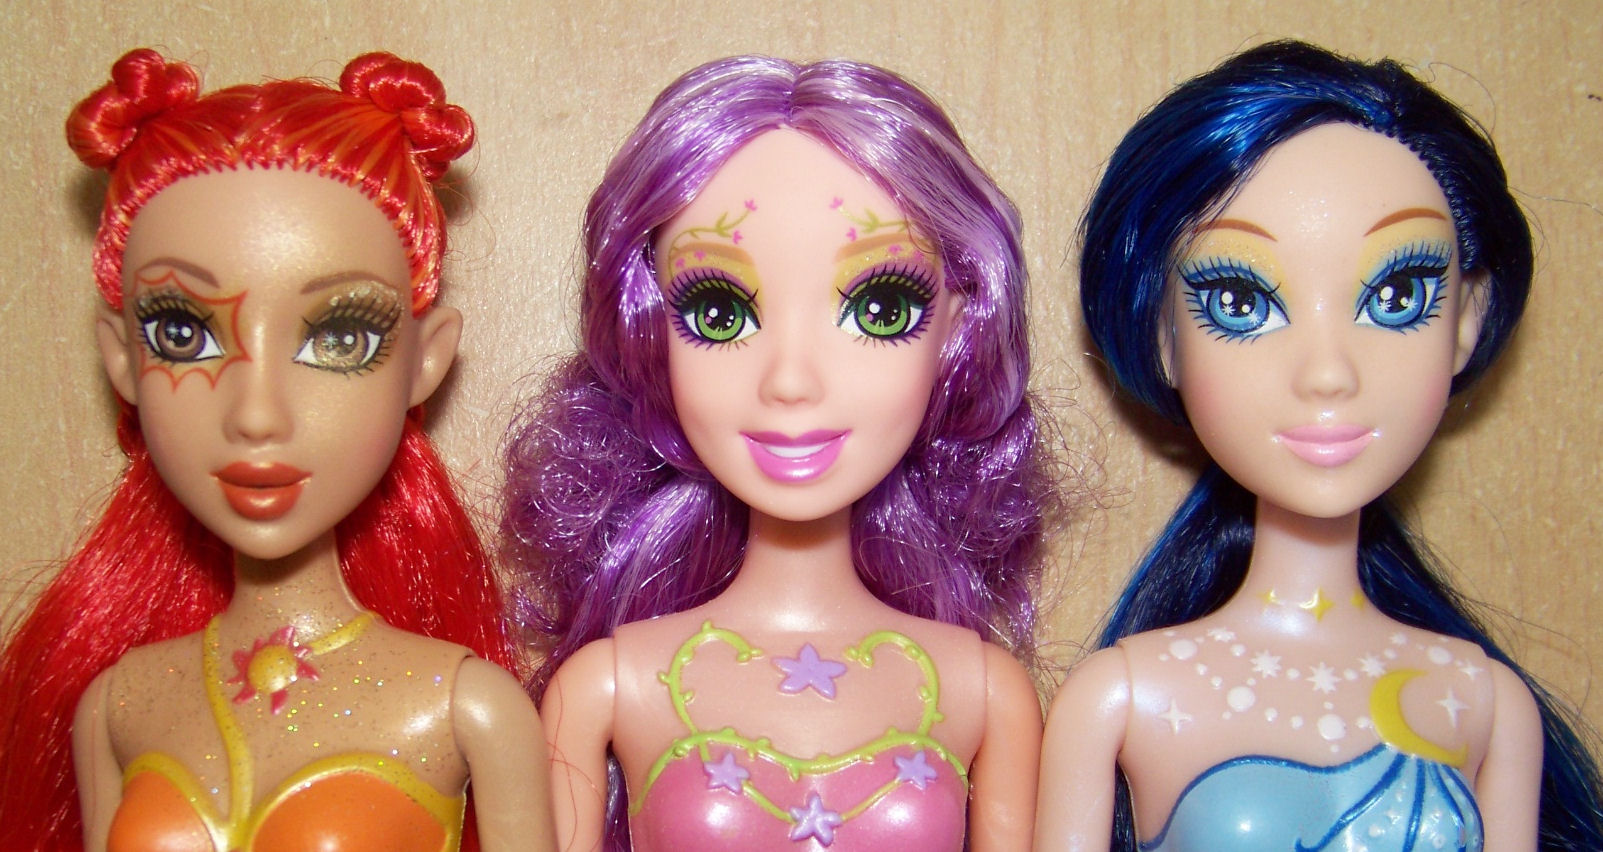 three dolls wearing costumes, including one with pink and orange hair